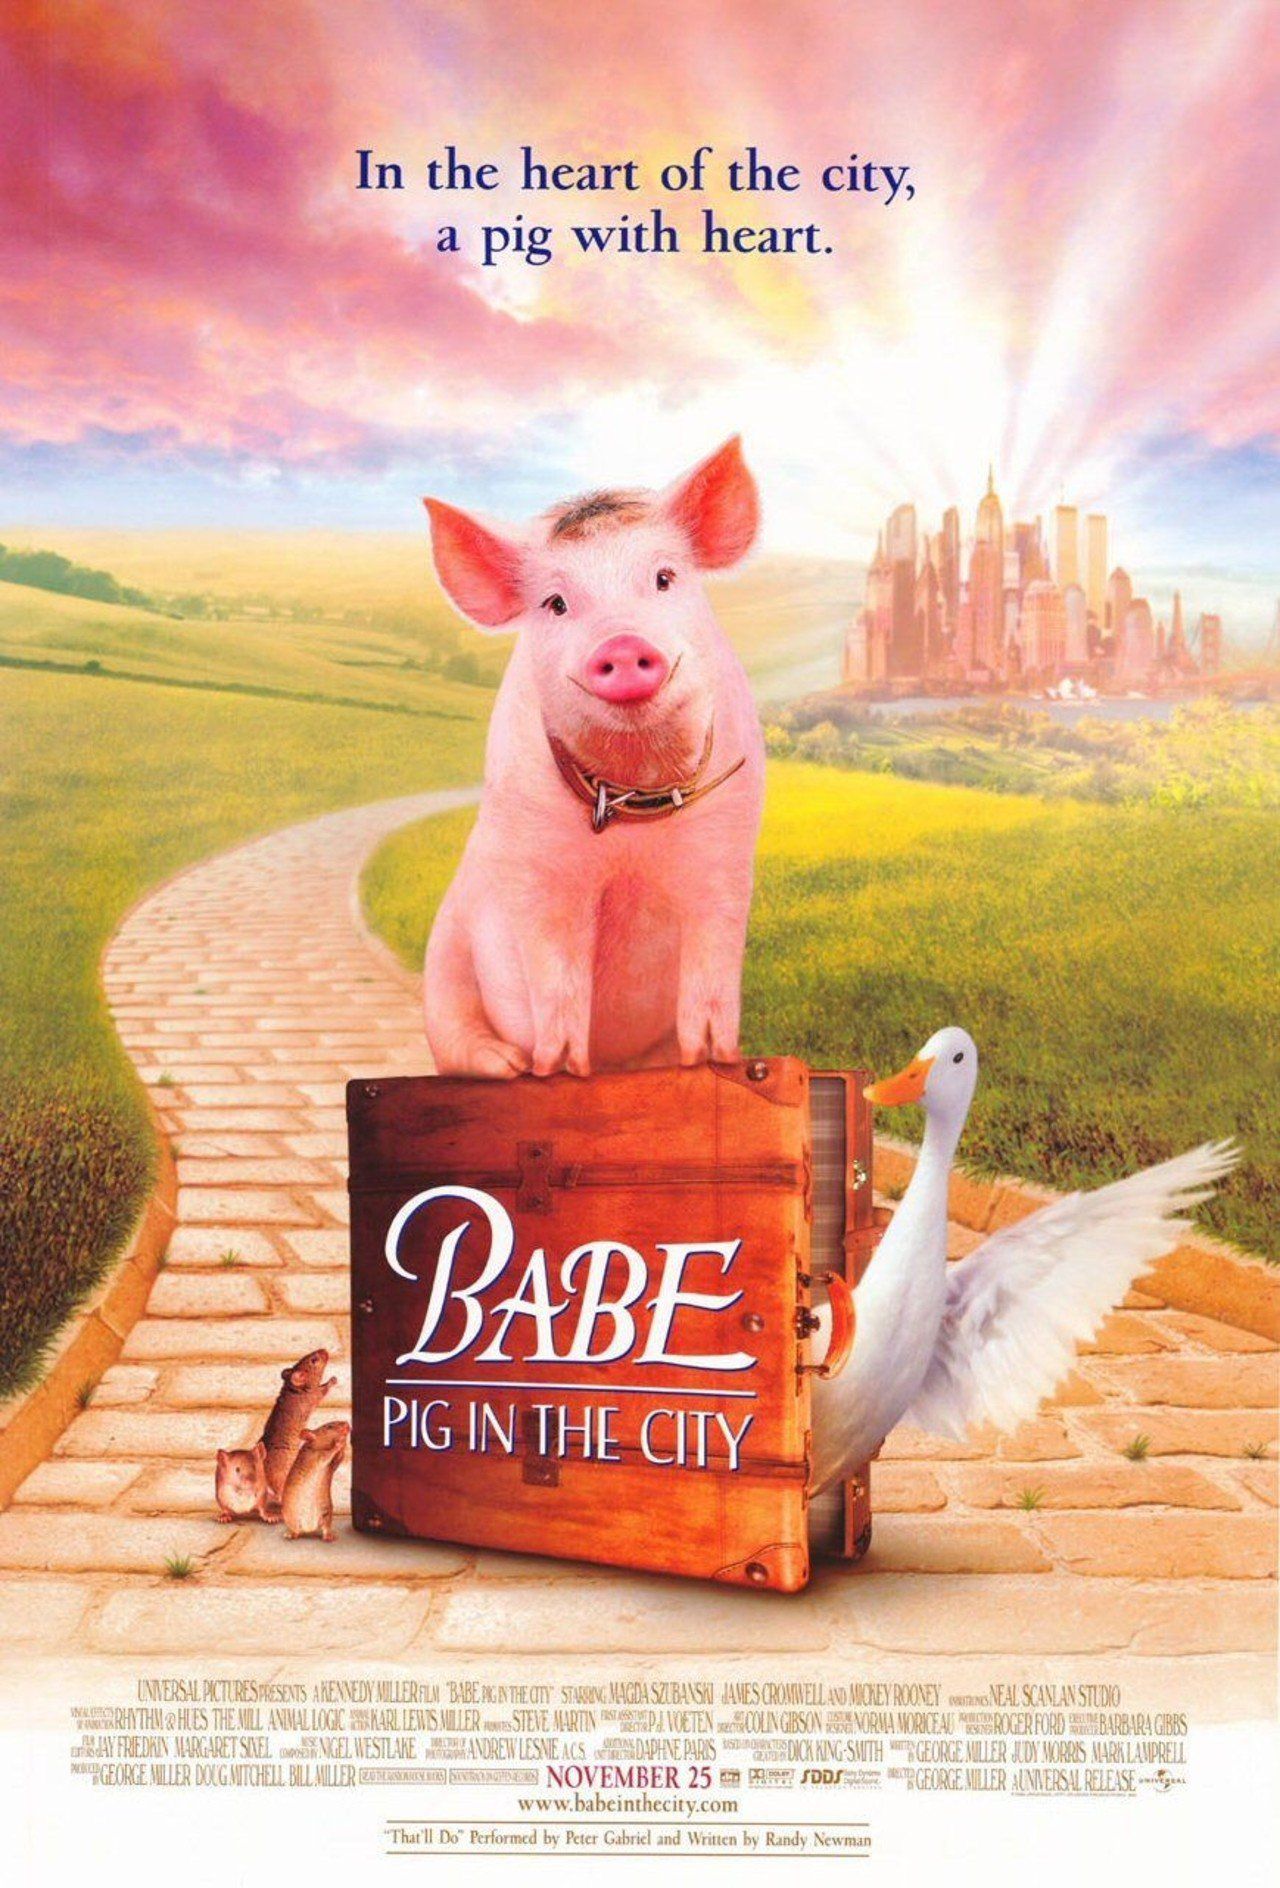 Babe Pig in the City Film Poster